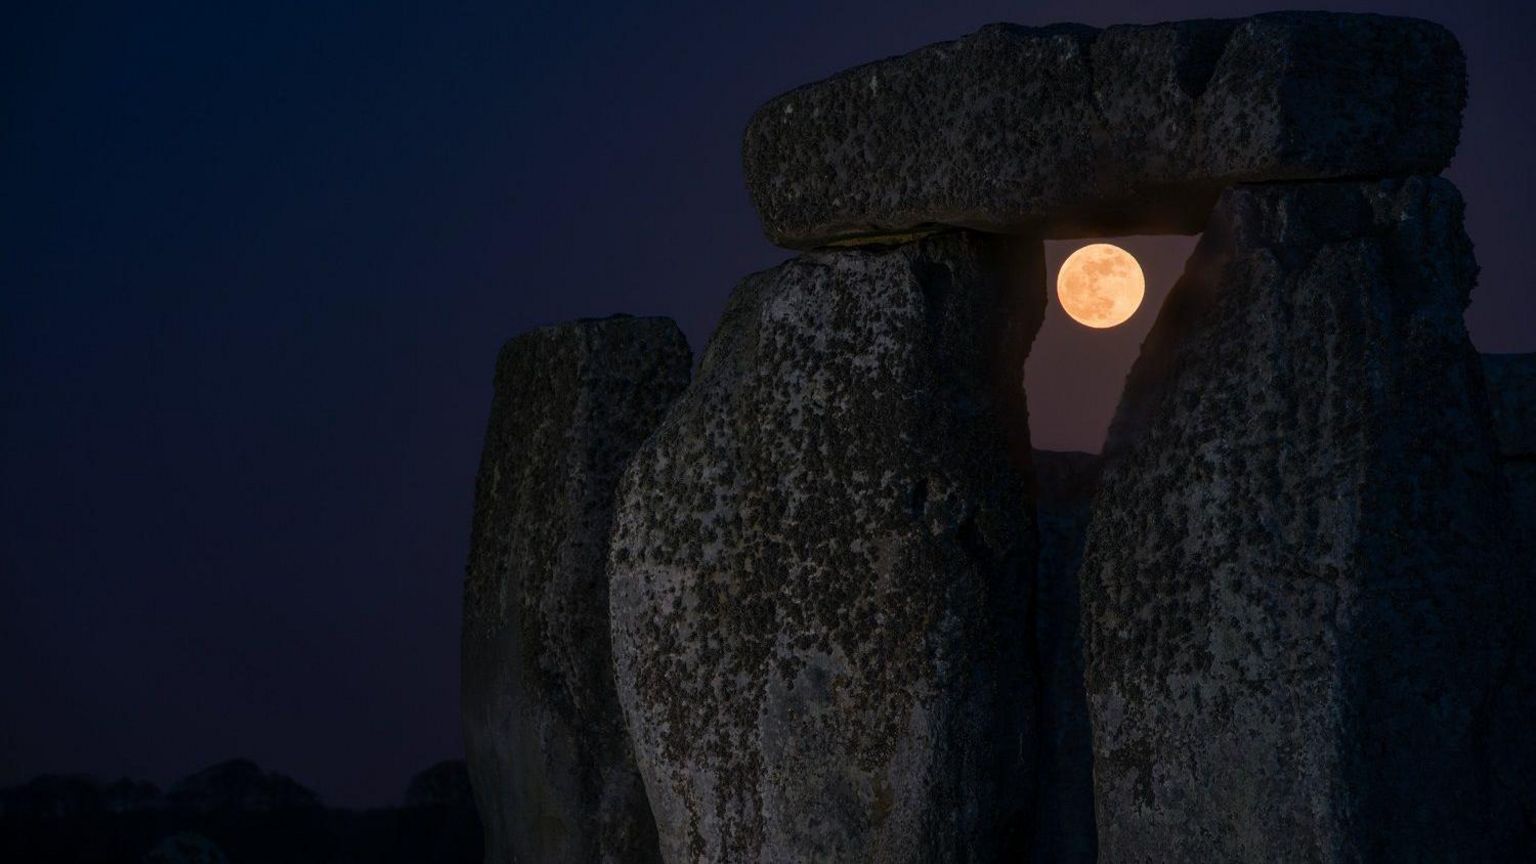 Night-time with some of Stonehenge and the Moon visible